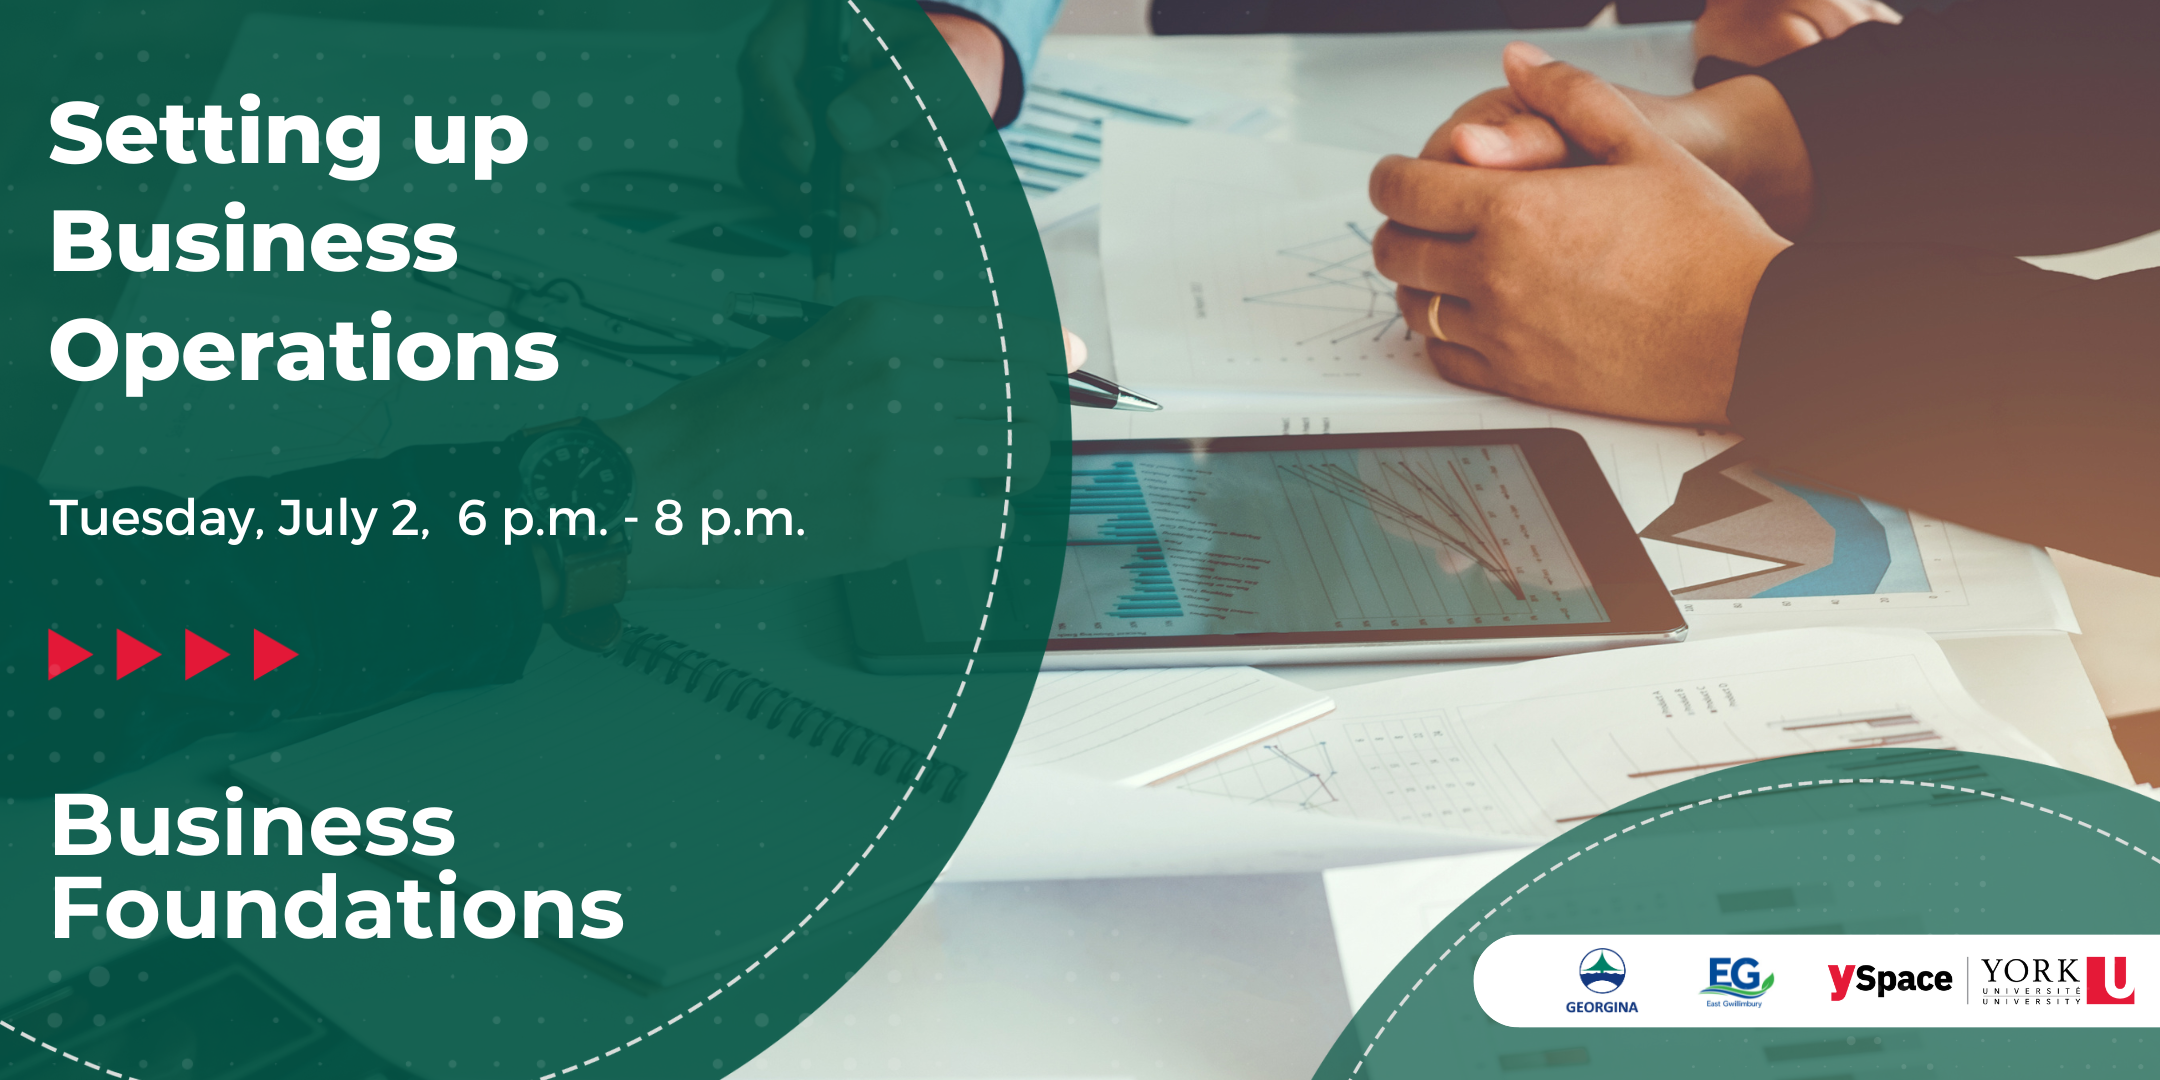 table with arms/hands and tablet with paper and graphs with the text Setting up Business Operations Tuesday July 2 6 p.m. - 8 p.m. Business Foundations